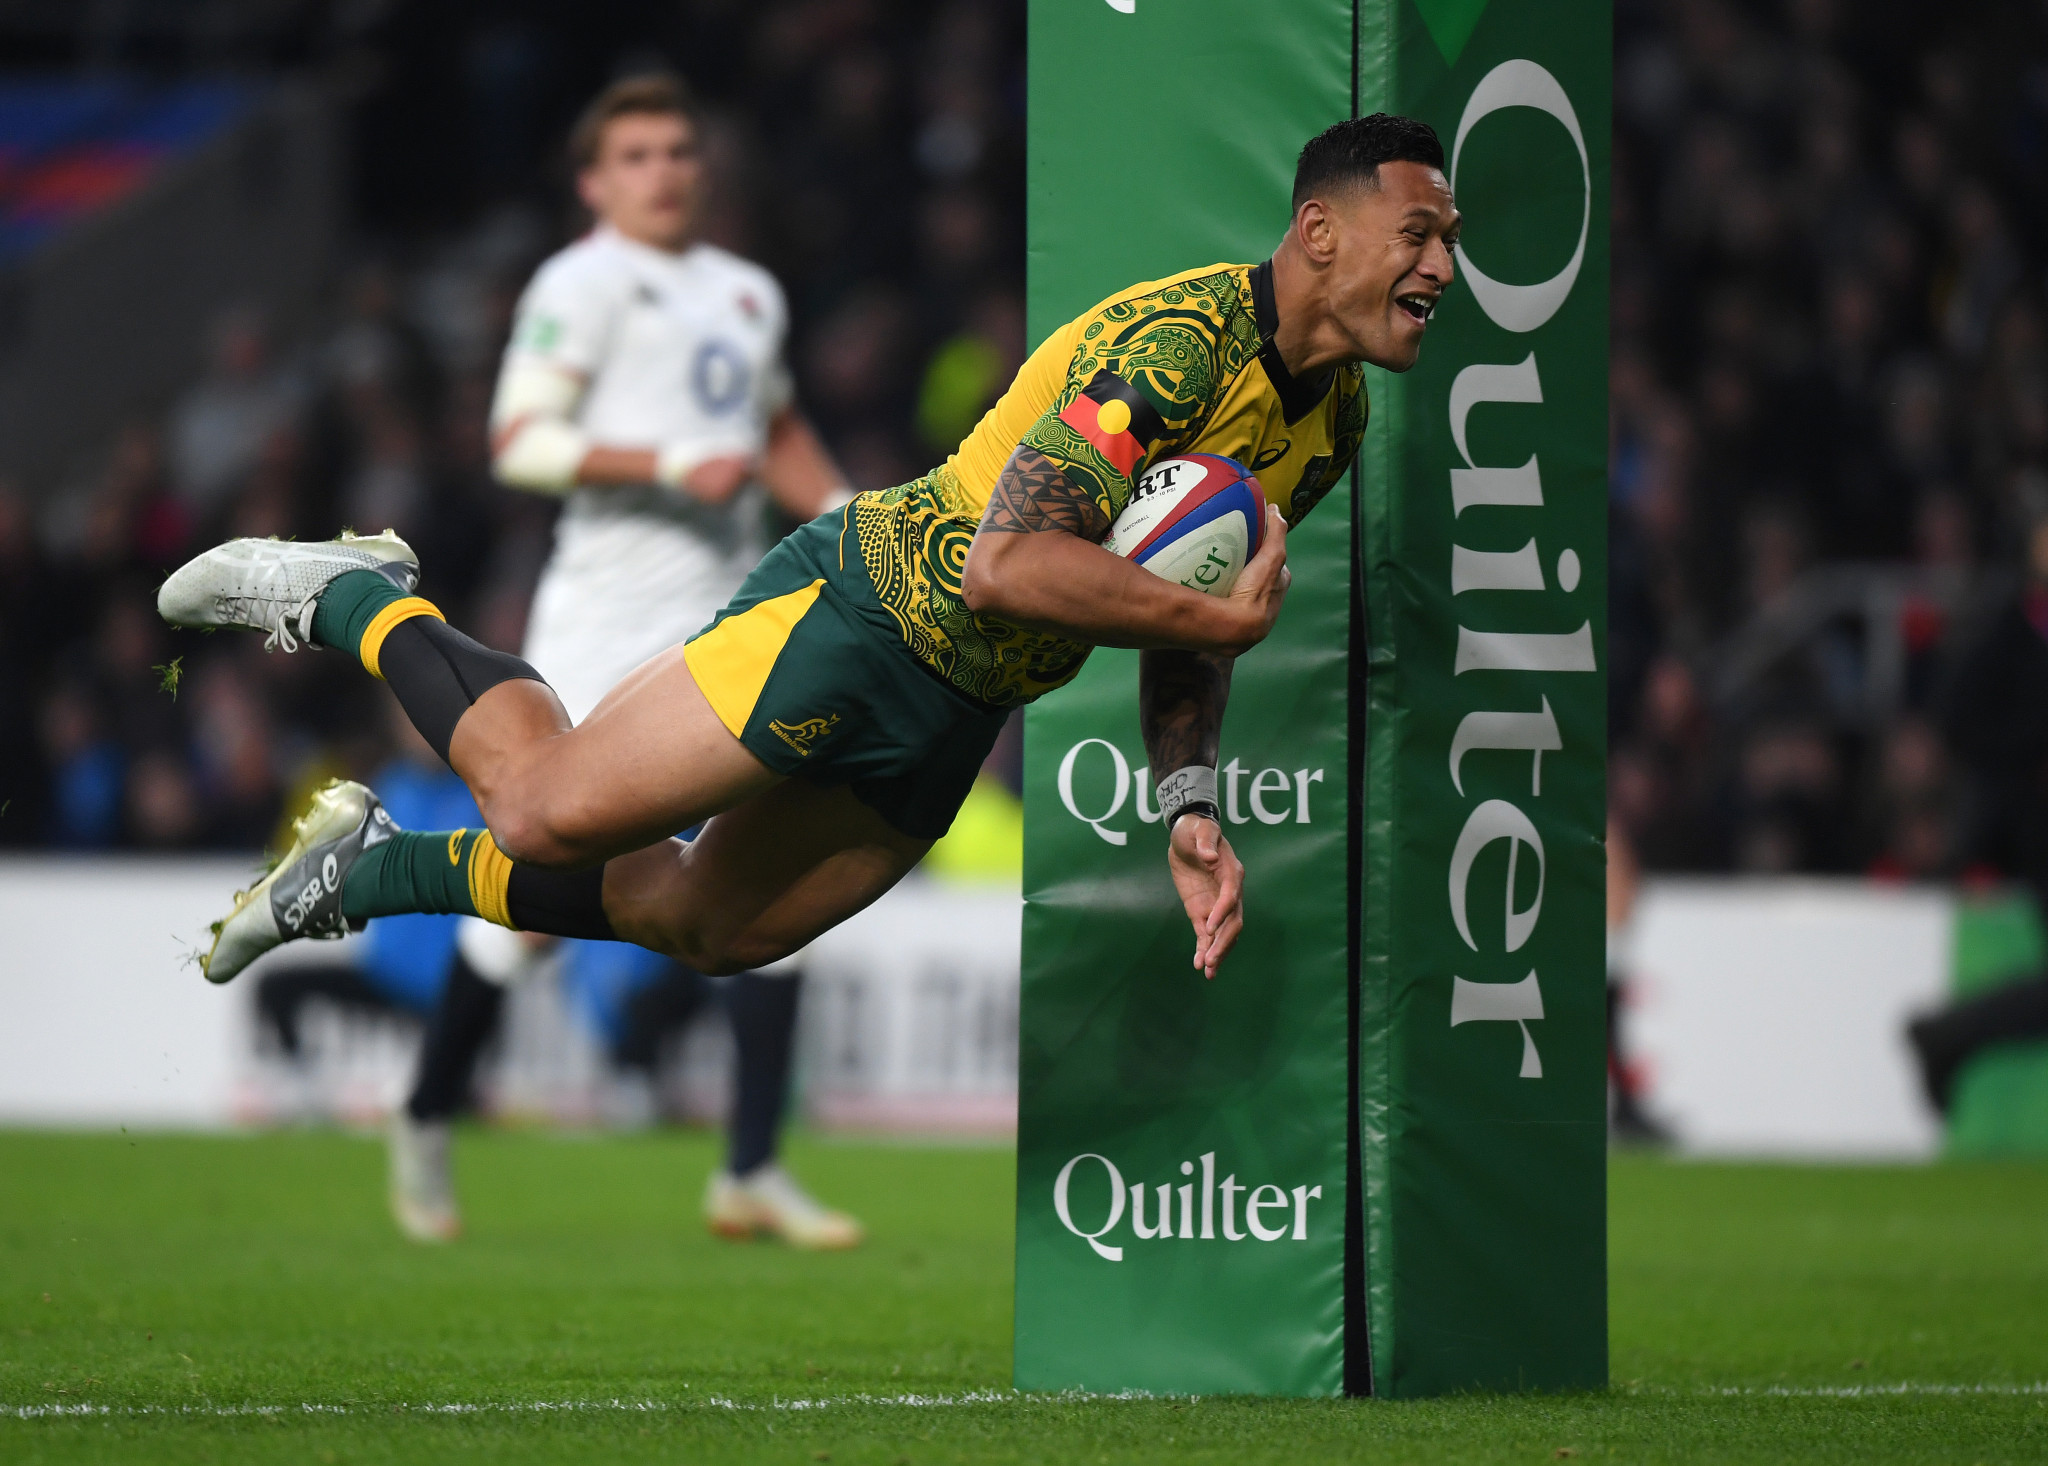 Folau's career in jeopardy as sacking by Rugby Australia upheld by panel 